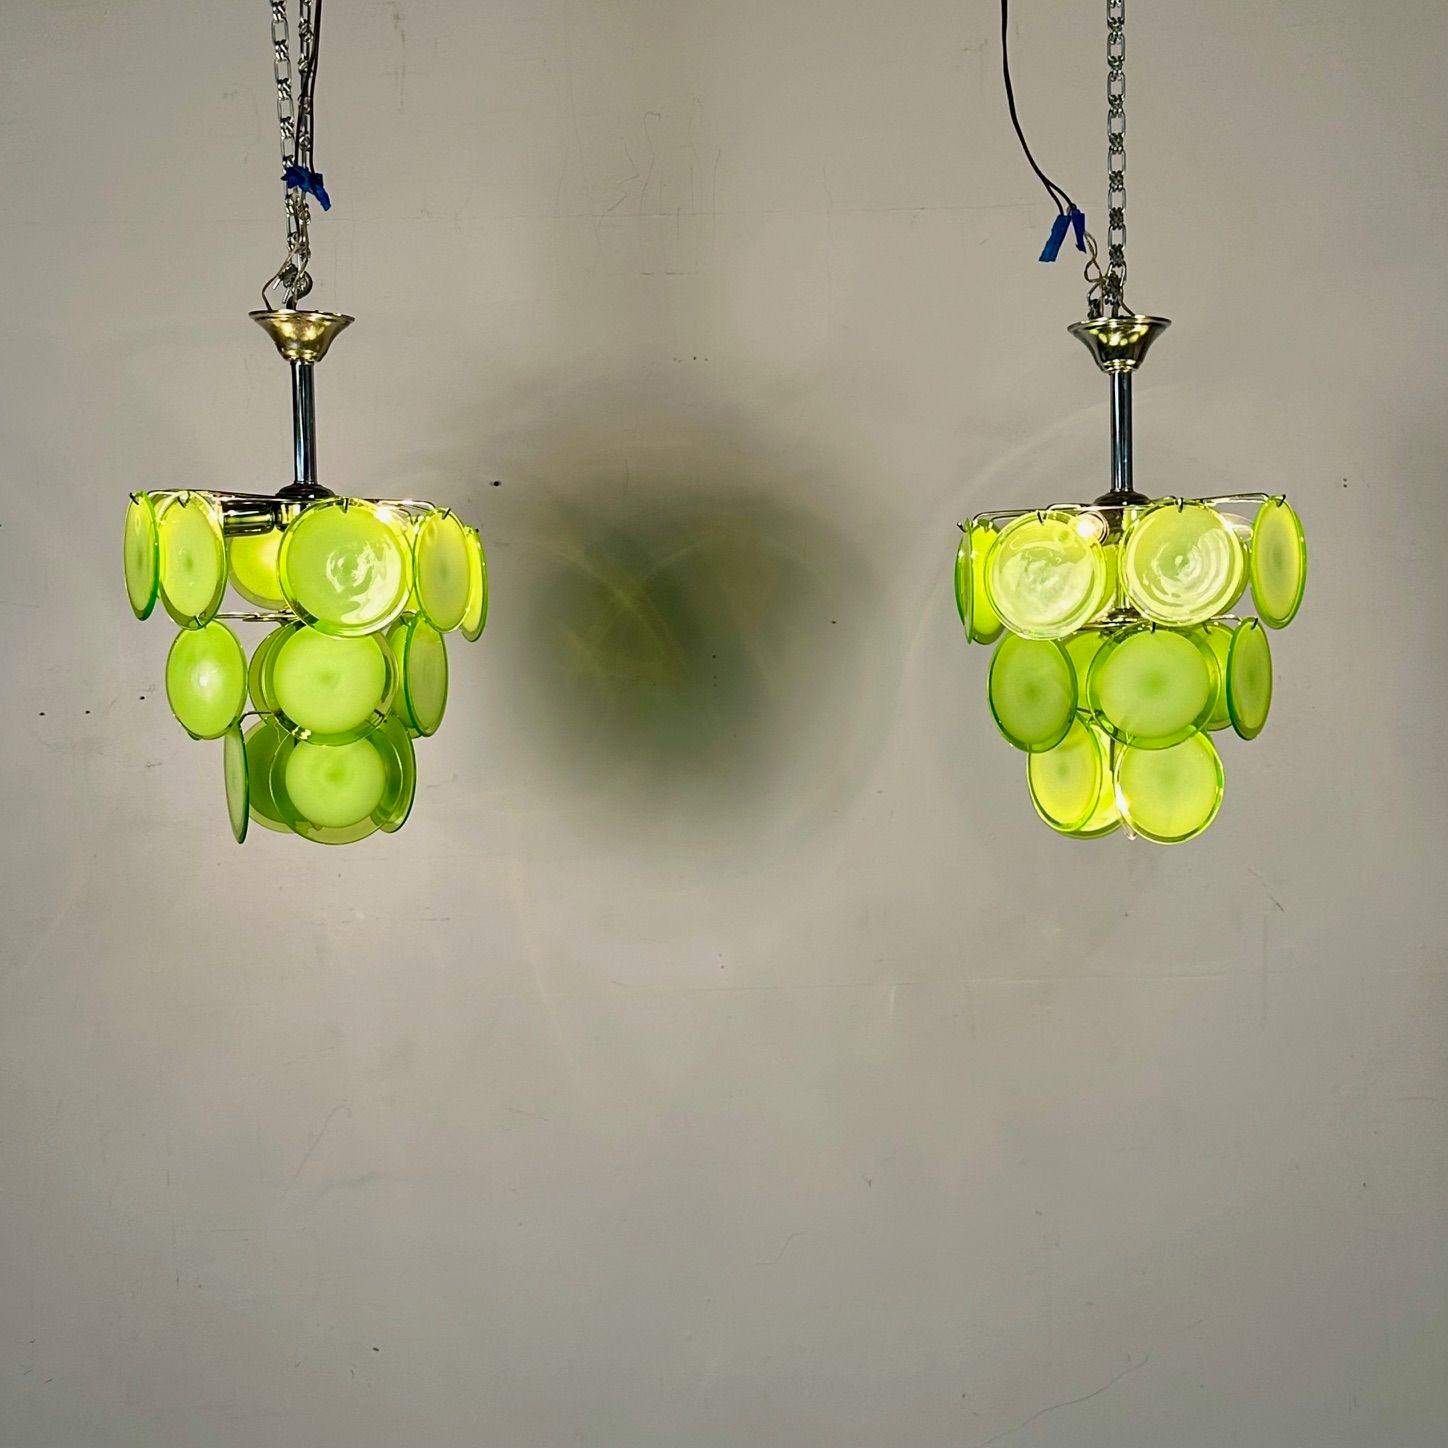 Pair of Mid-Century Modern Style Small Green Murano Glass Disk Chandeliers For Sale 5